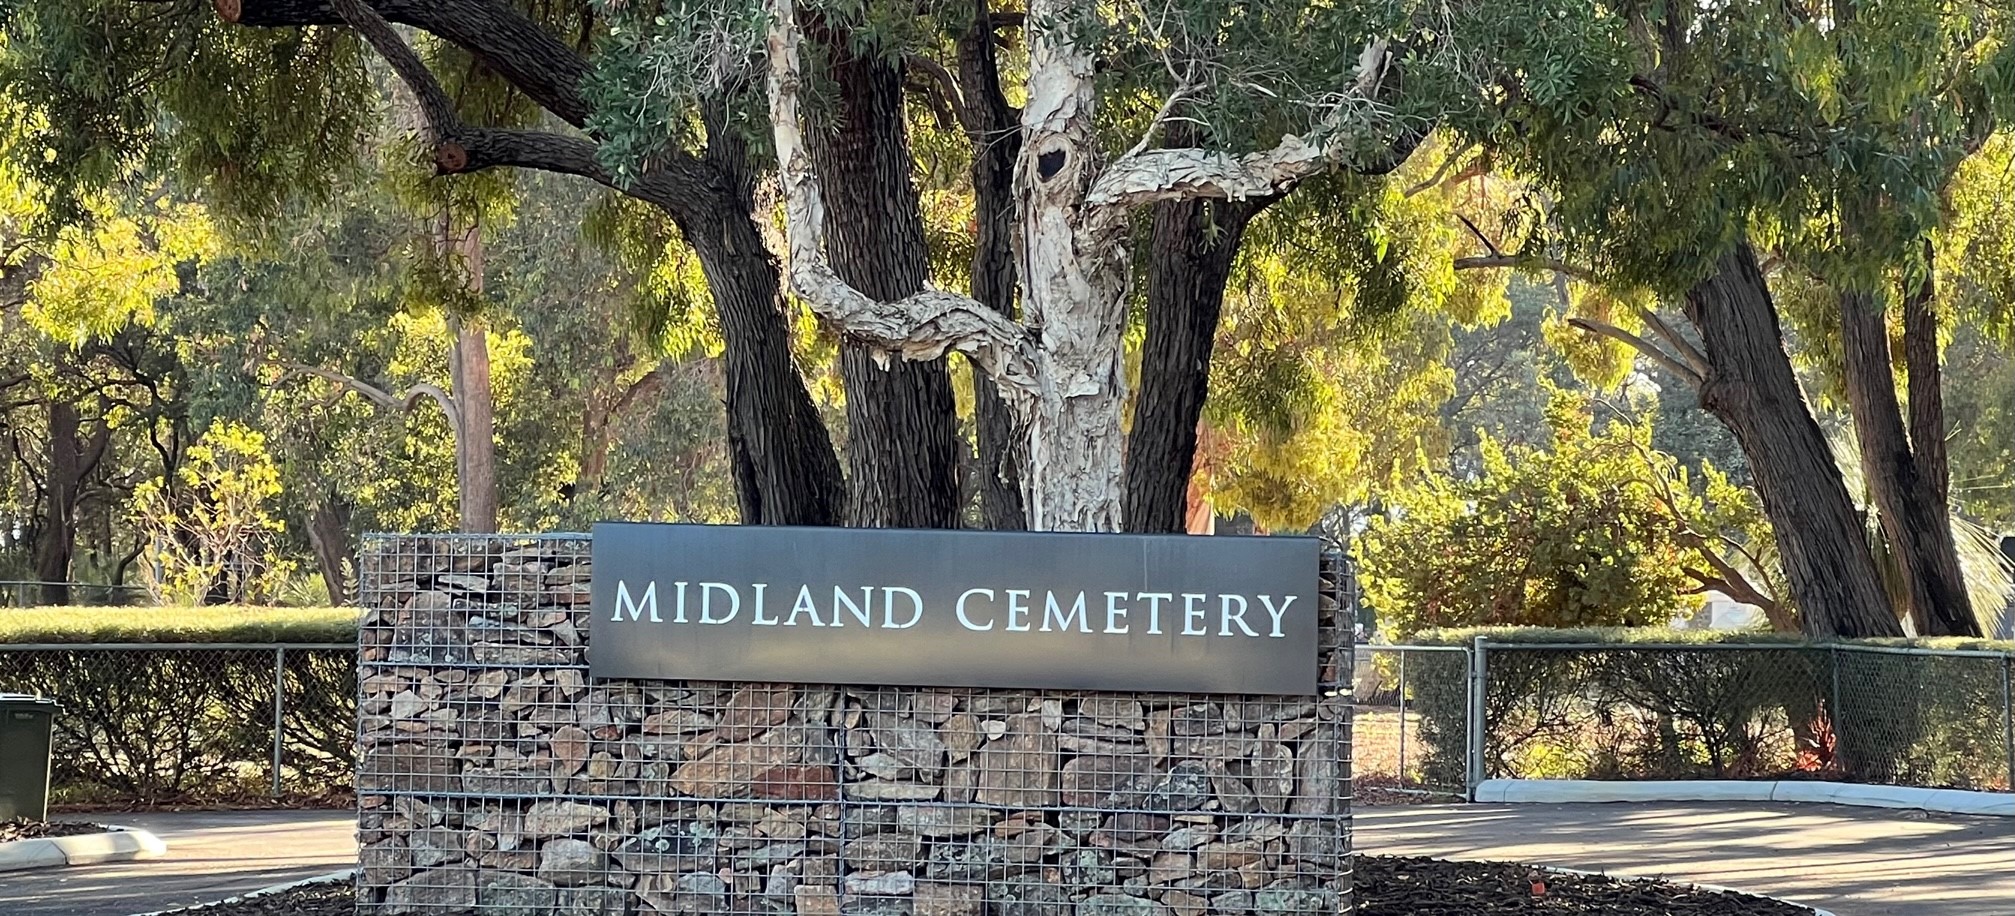 Midland Cemetery new entrance sign in corten steel with gabion wall filled with moss rock